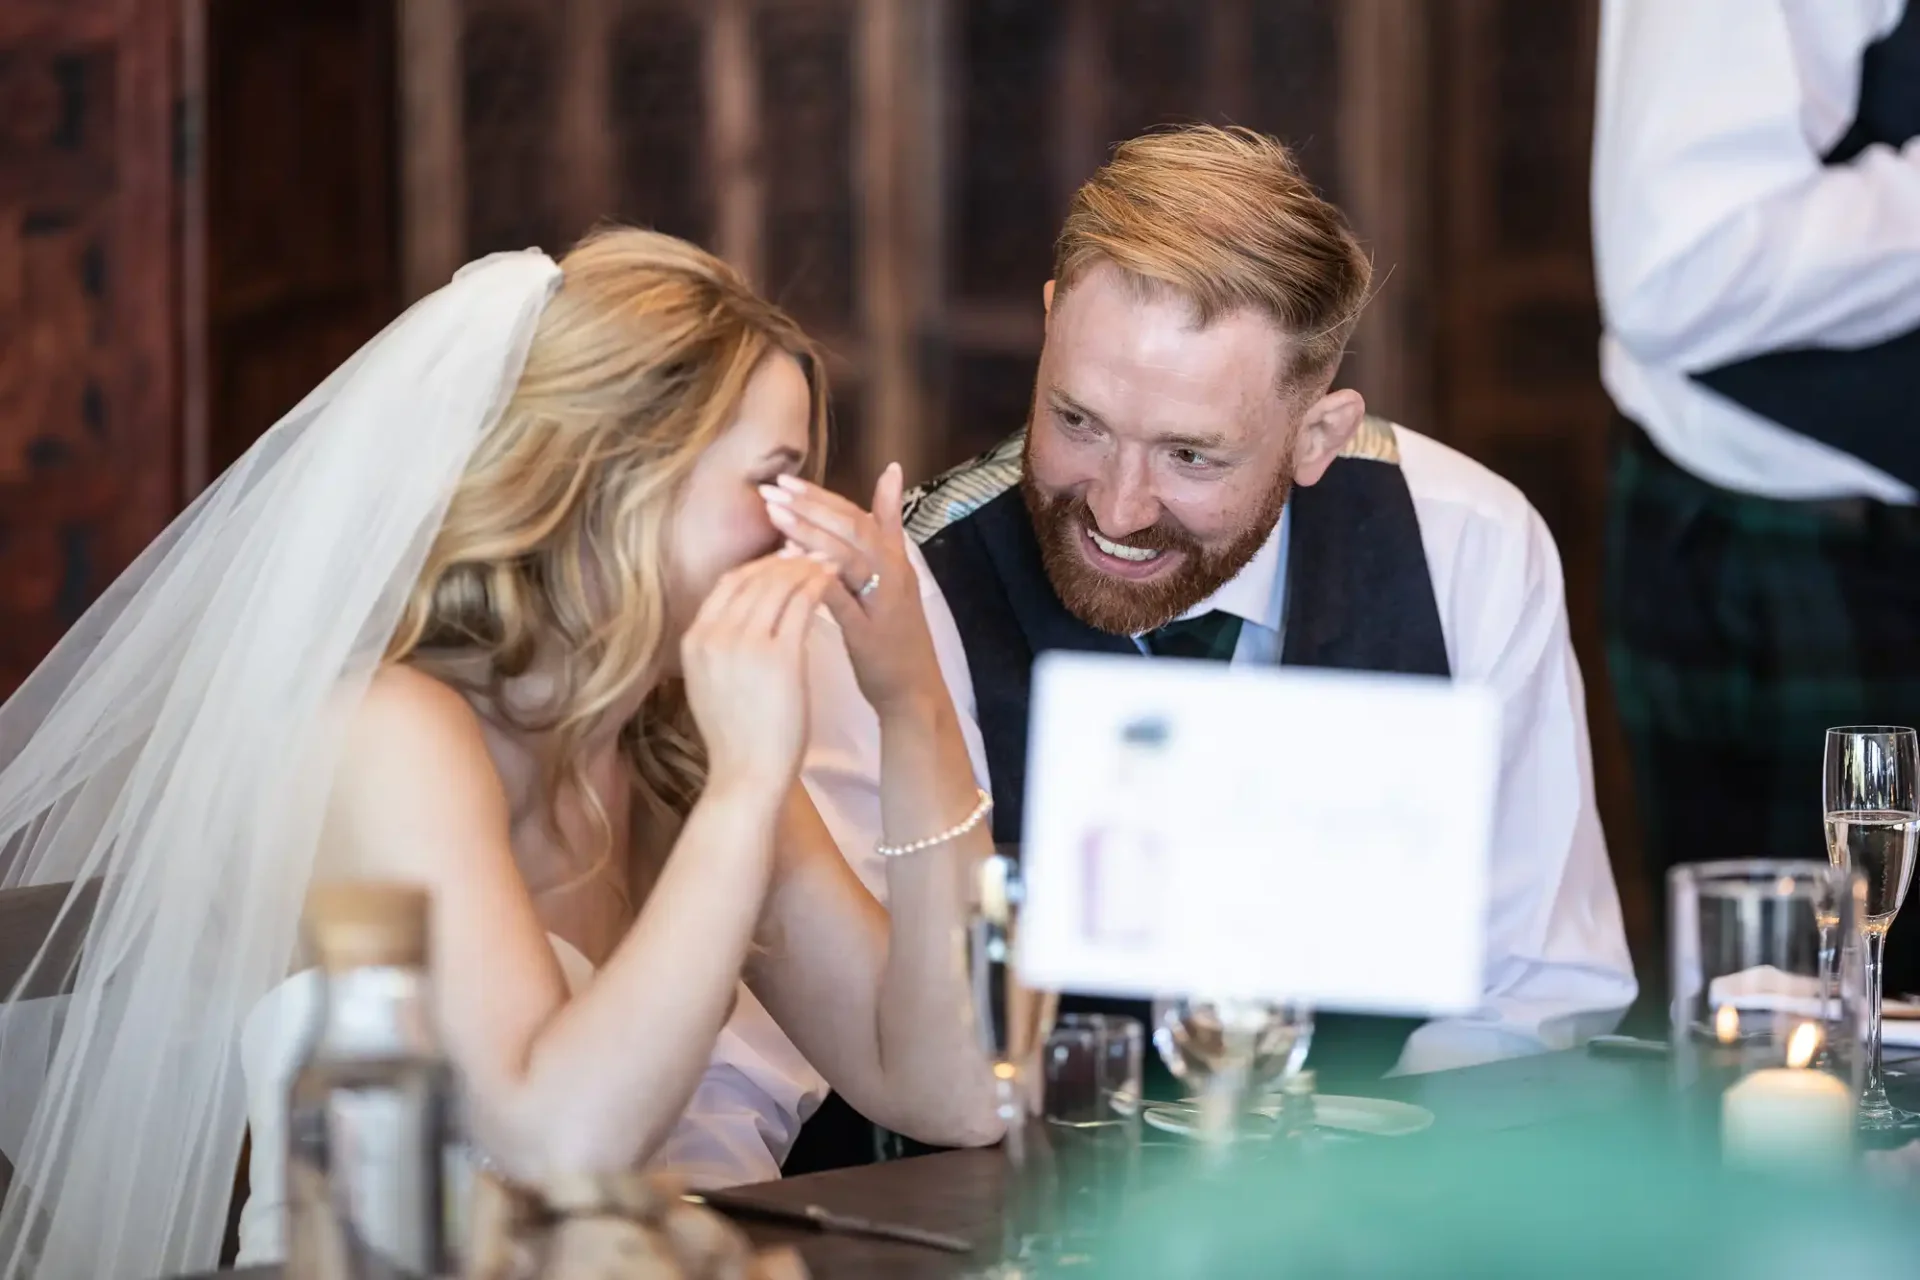 Bride and groom laughing together at a wedding reception table, with the groom wearing a suit and the bride in her wedding dress.